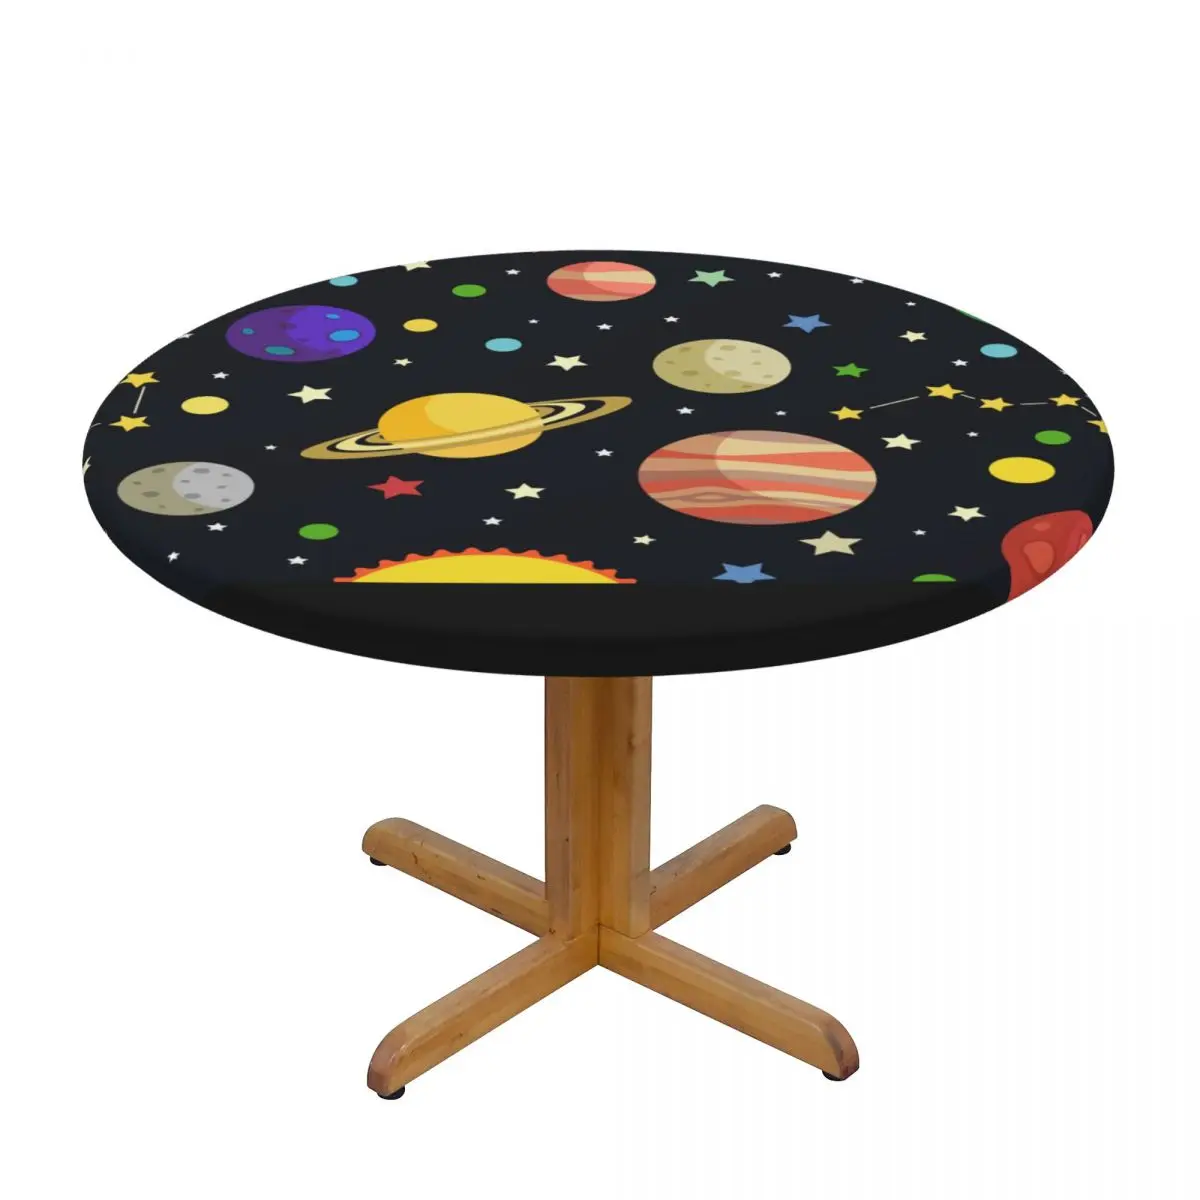 

Space Planets Stars Comets Constellations Waterproof Polyester Round Tablecloth Catering Fitted Table Cover